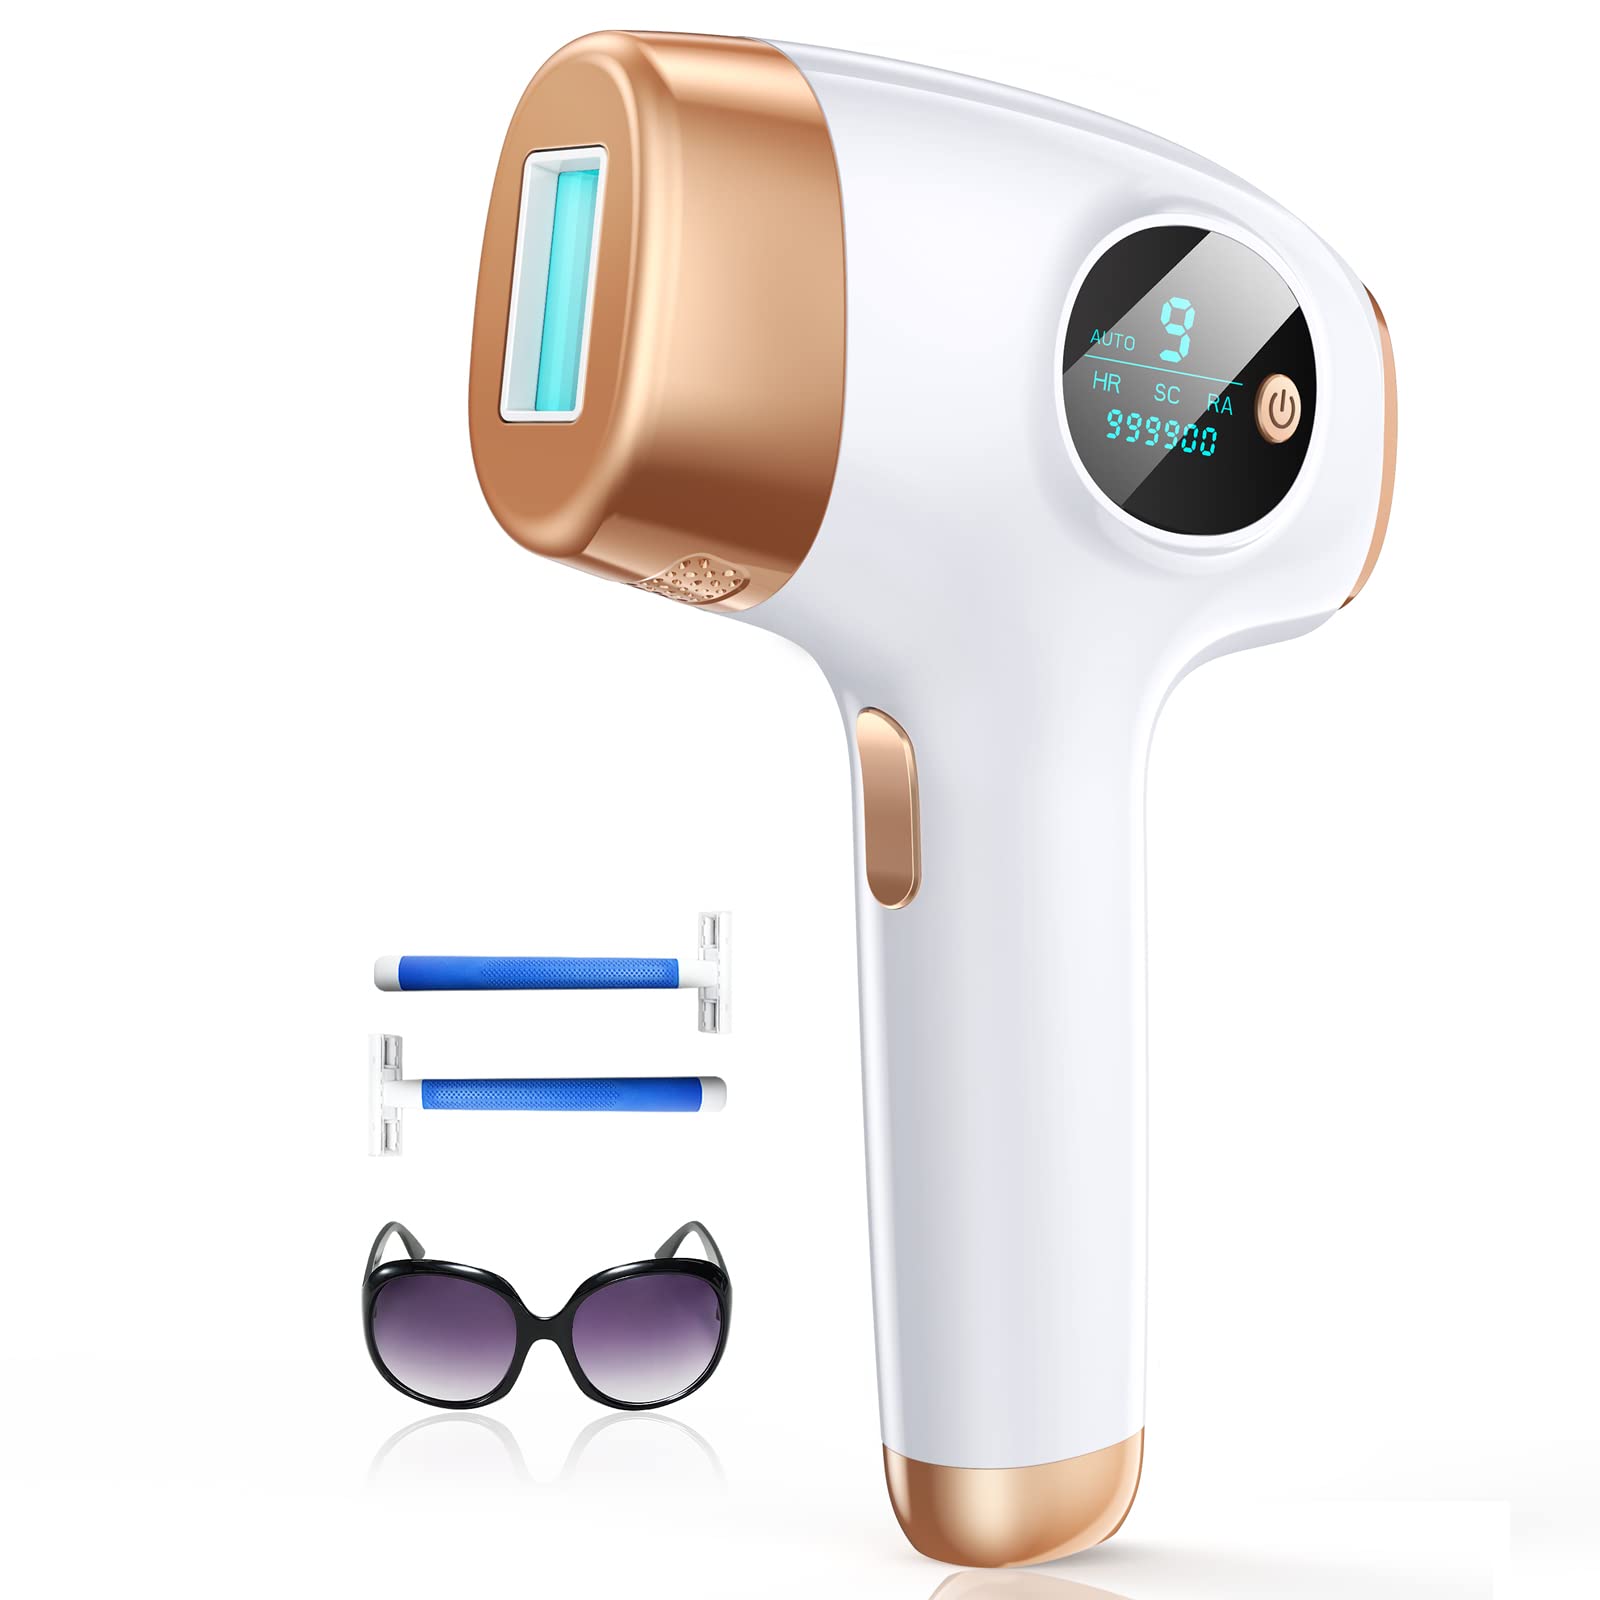 Laser Hair Removal for Women and Men, Newest 3 in 1 IPL Hair Removal, Permanent  Hair Remover At Home, 9 Energy Levels, 999,900 Flashes Painless, Safe,  Cleared for Facial Bikini Whole Body Gold Champagne